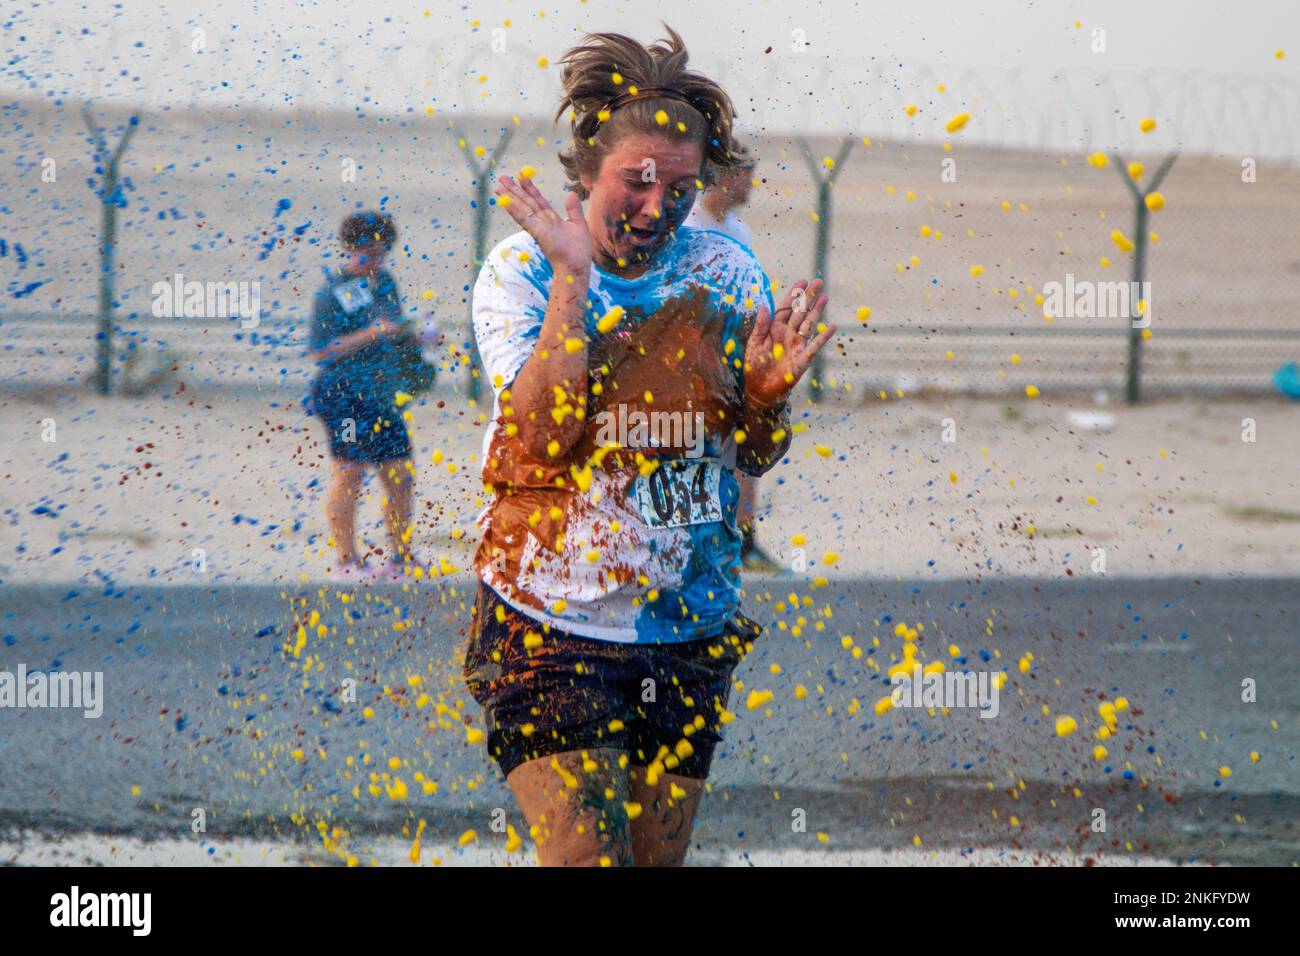 Soldiers across Camp Arifjan, Kuwait took part in a 5k color run hosted by the MWR on Aug. 14, 2022. Stock Photo